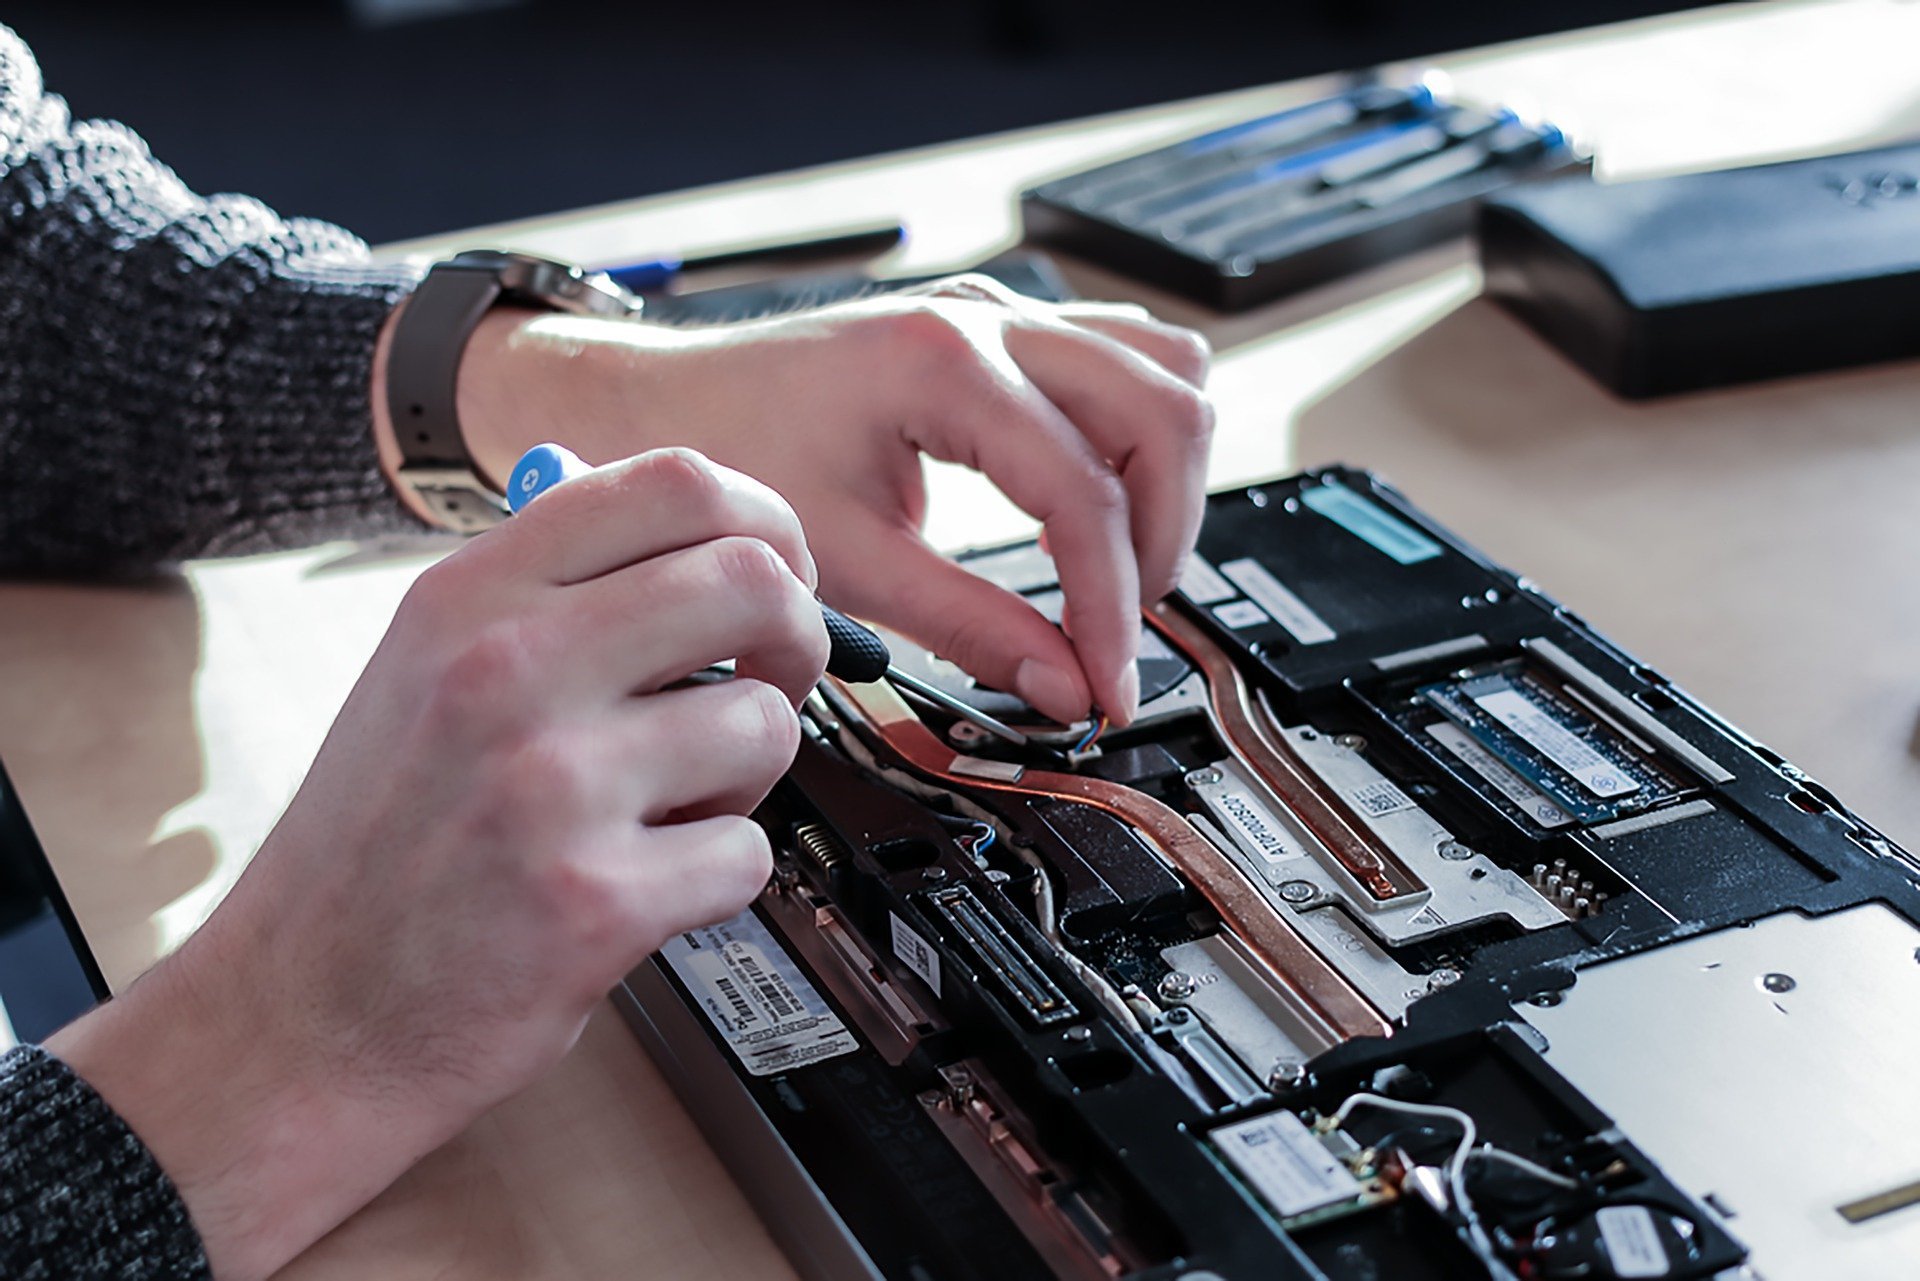 Computer Maintenance and Repair Course